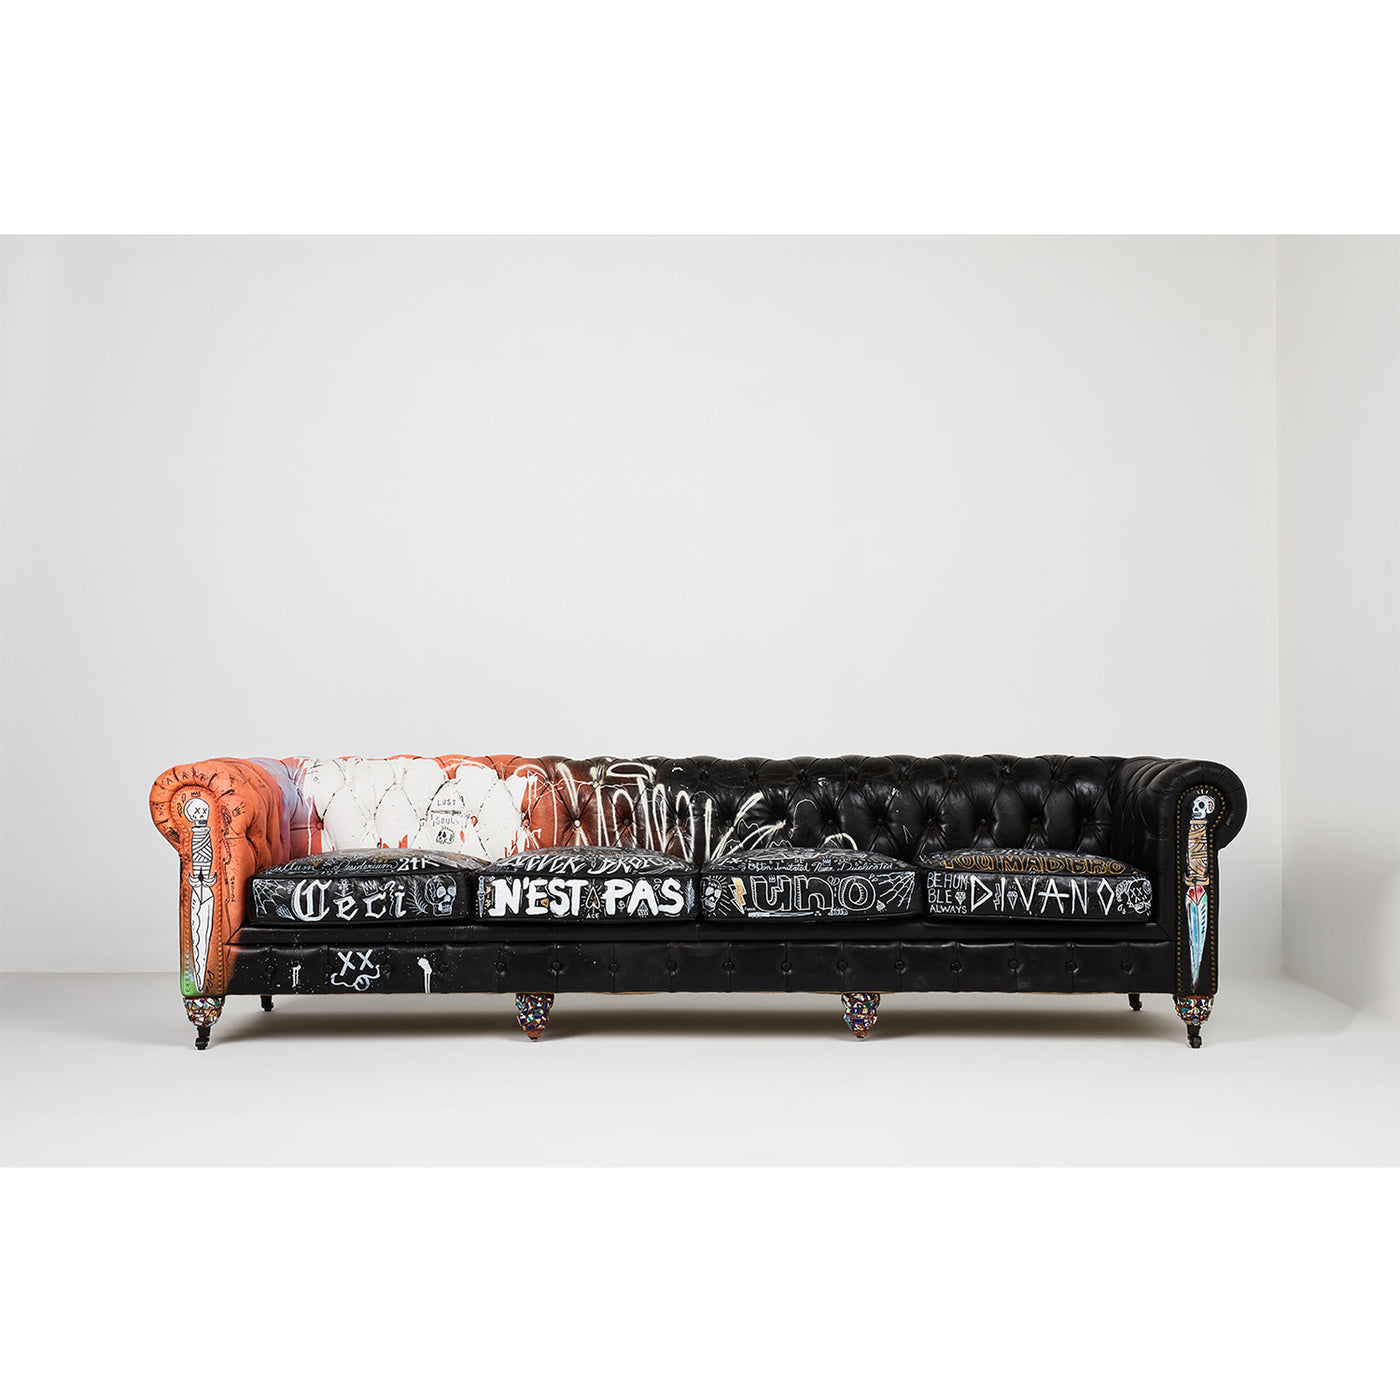 Bois et Cuir's 4 Place Chesterfield in top grain vintage distressed leather X Stikki Peaches Mixed Media Art Work Intervention